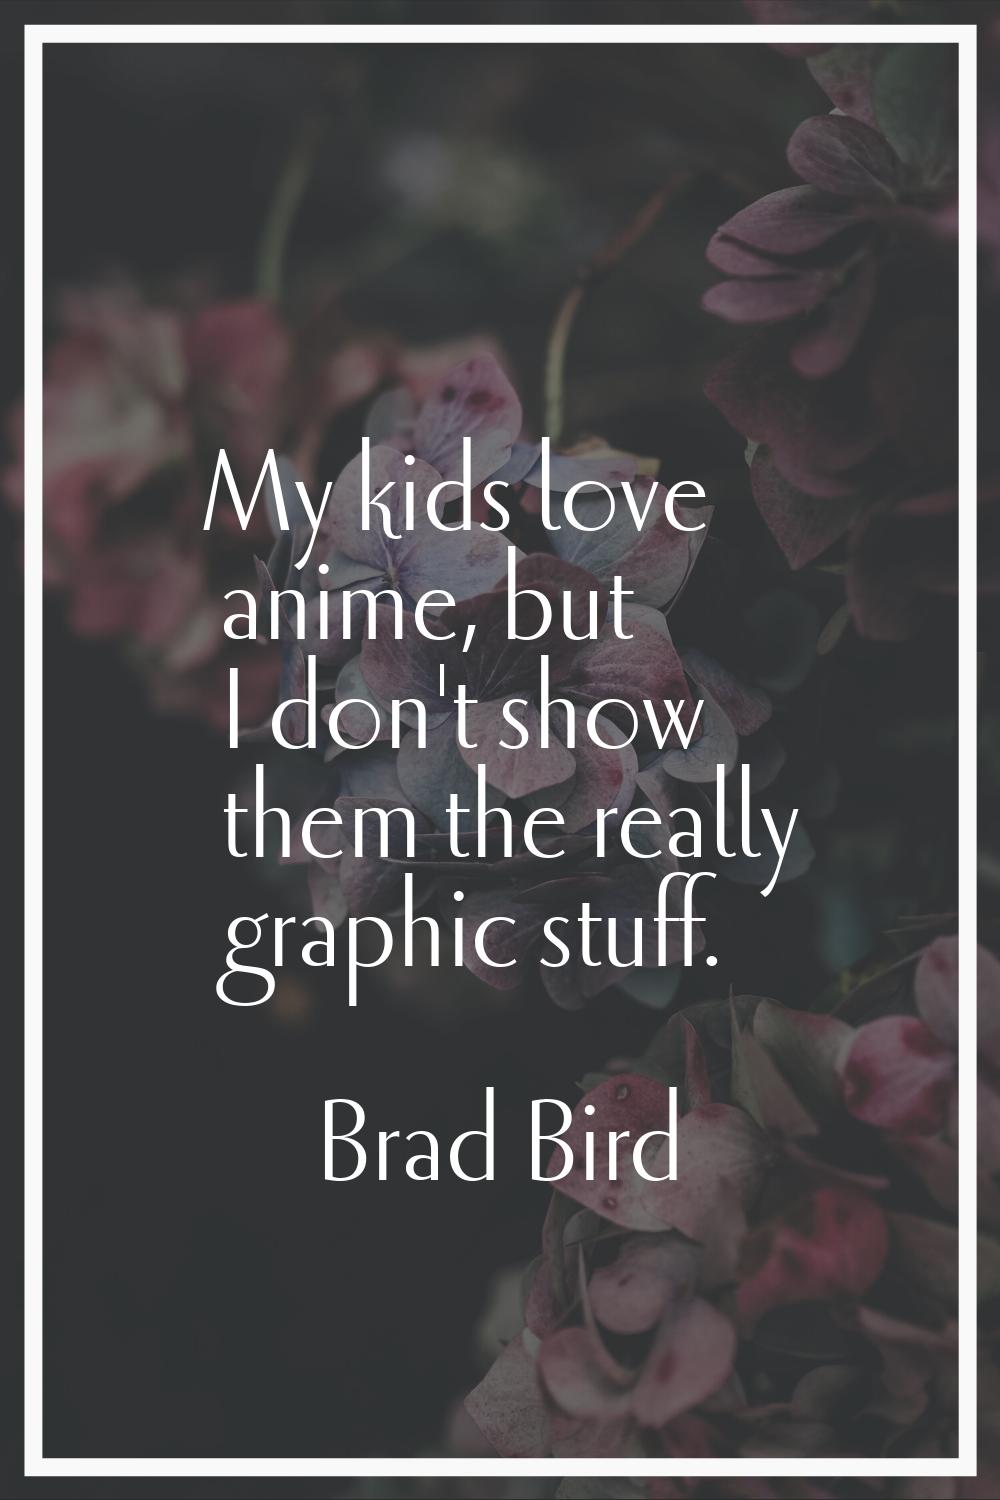 My kids love anime, but I don't show them the really graphic stuff.